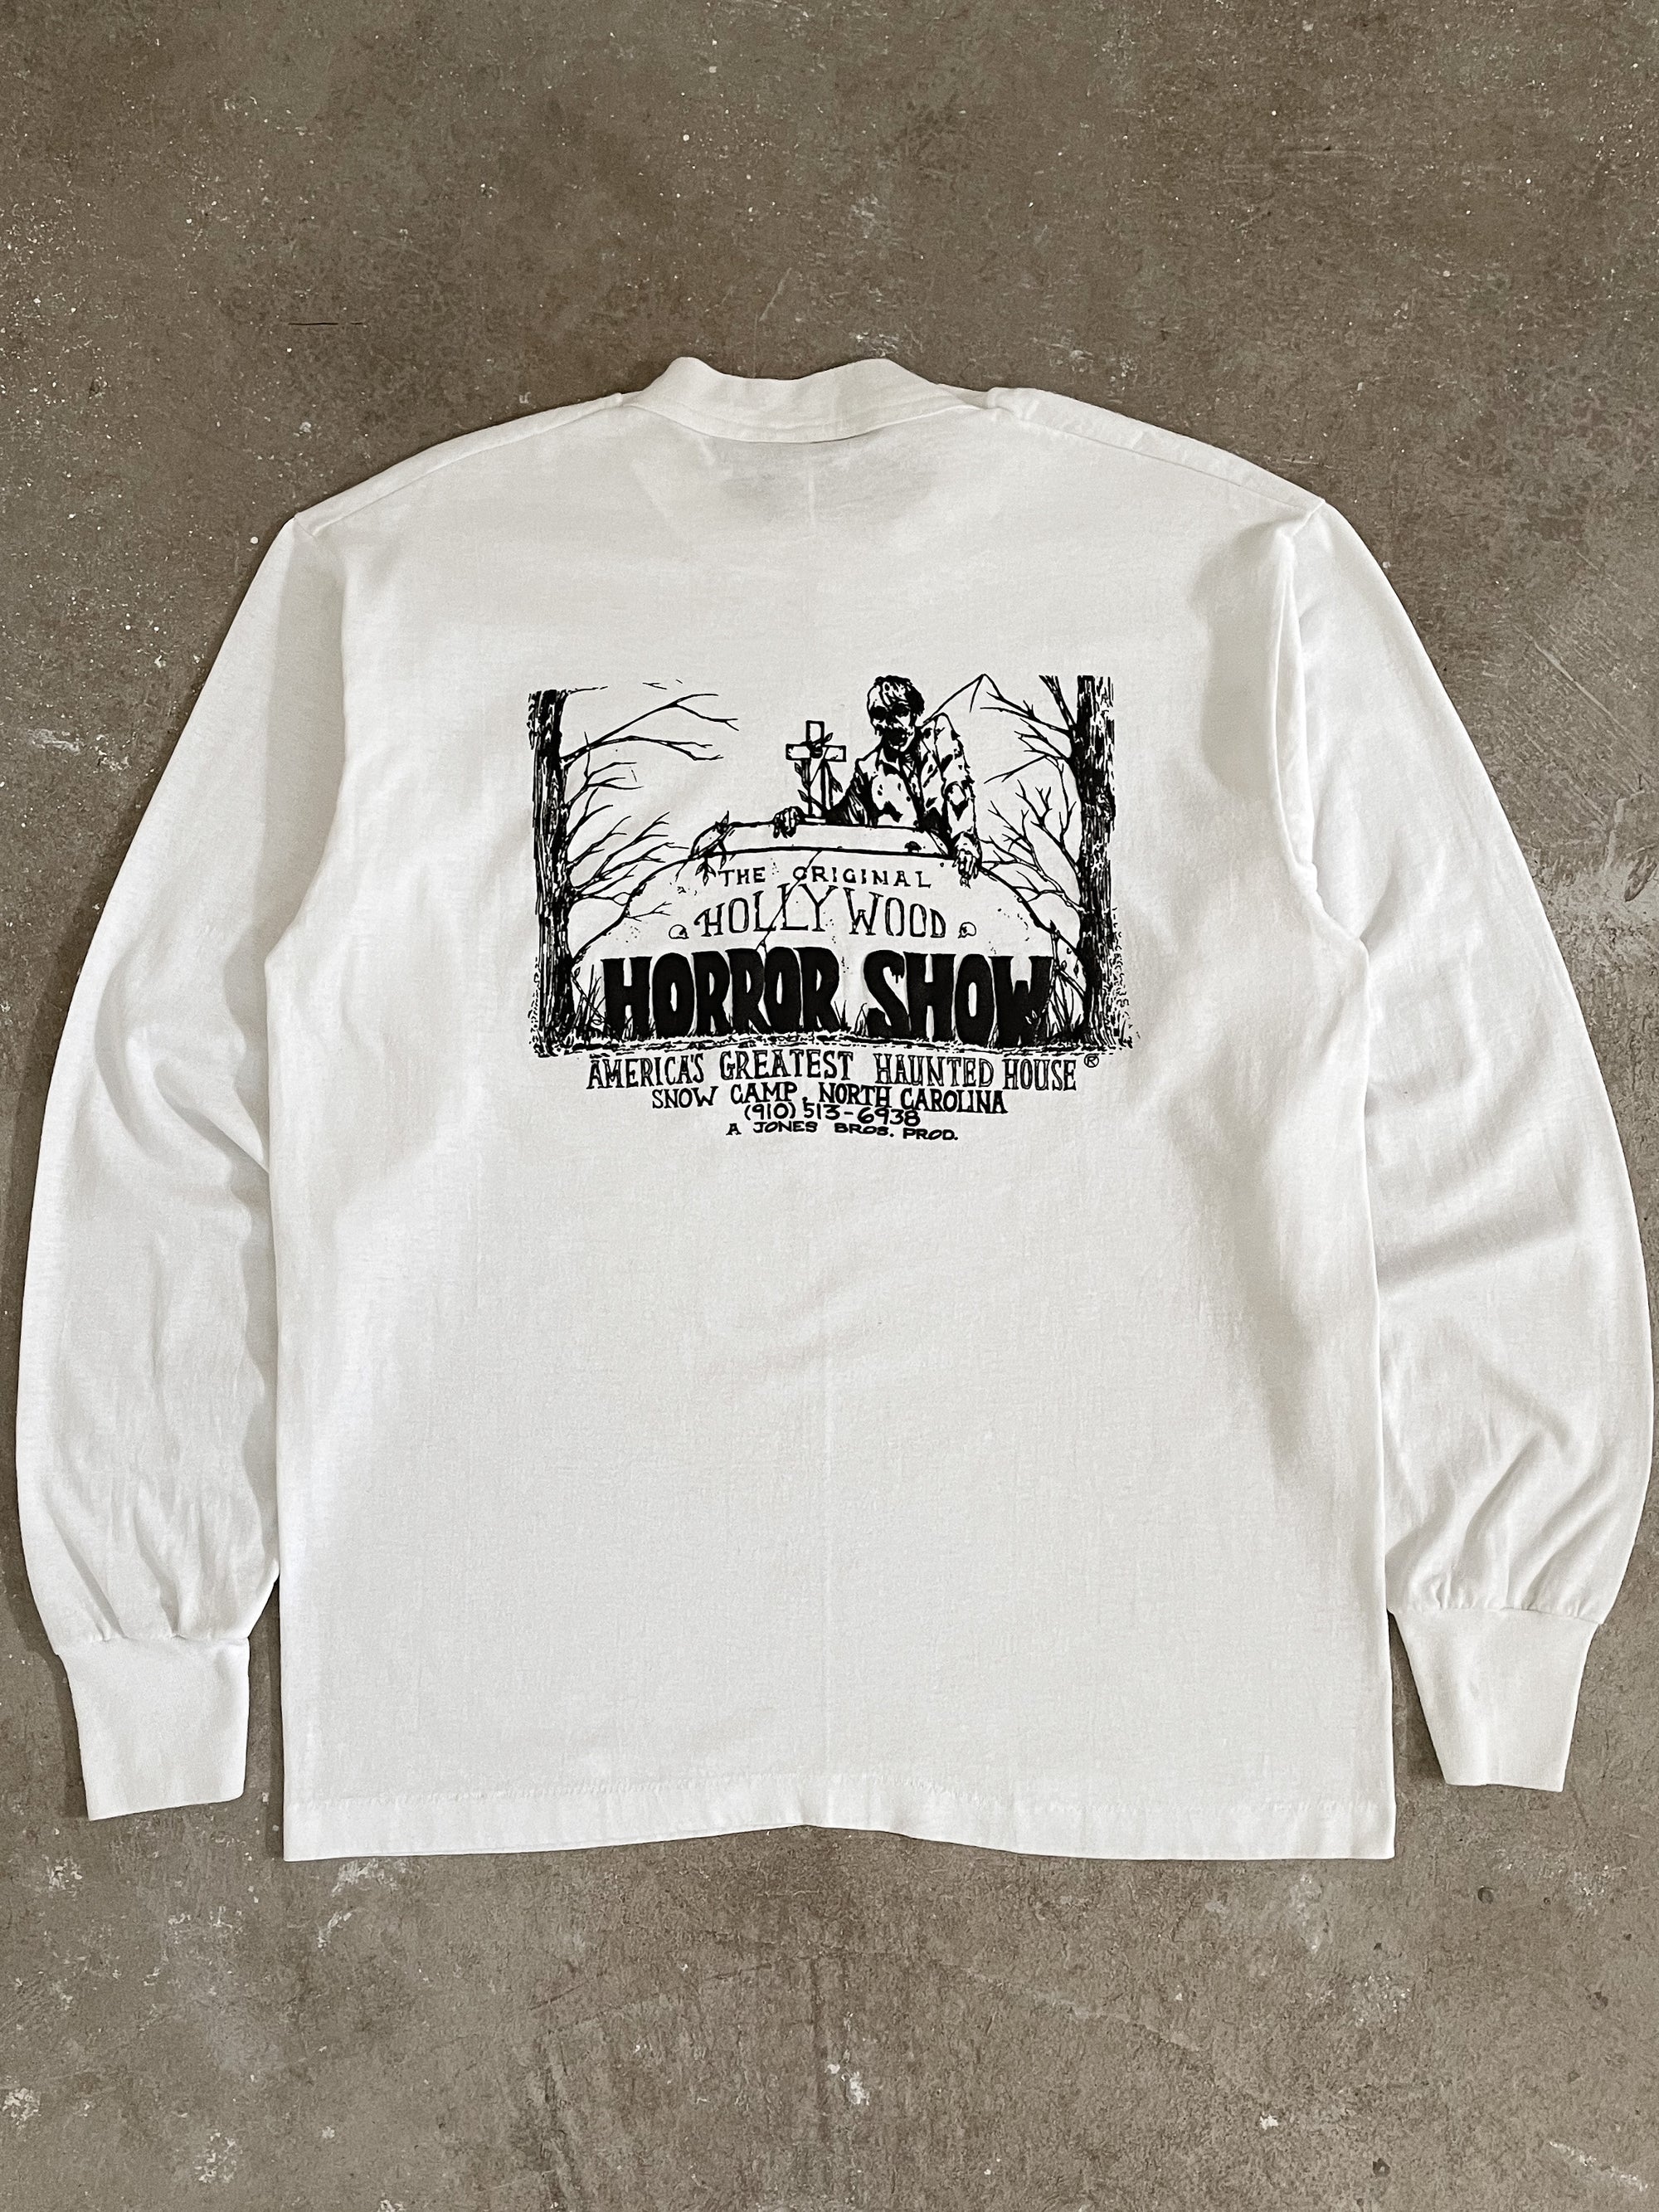 1990s “Hollywood Horror Show” Single Stitched Long Sleeve Tee (L)